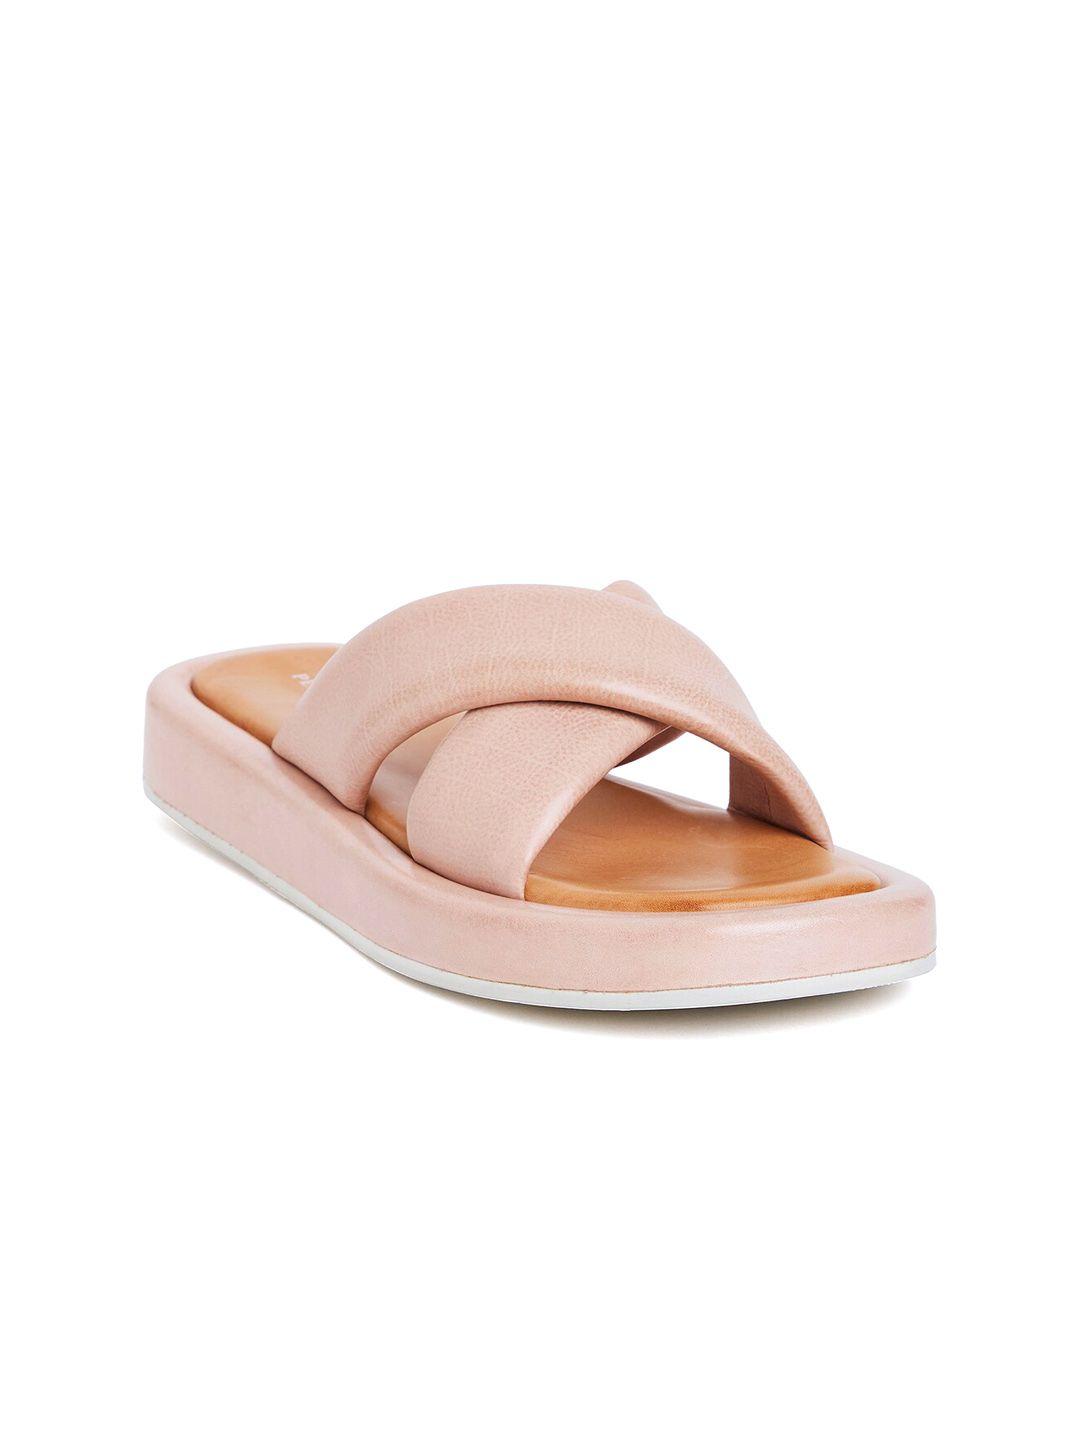 peach flores leather cross strap open toe flats